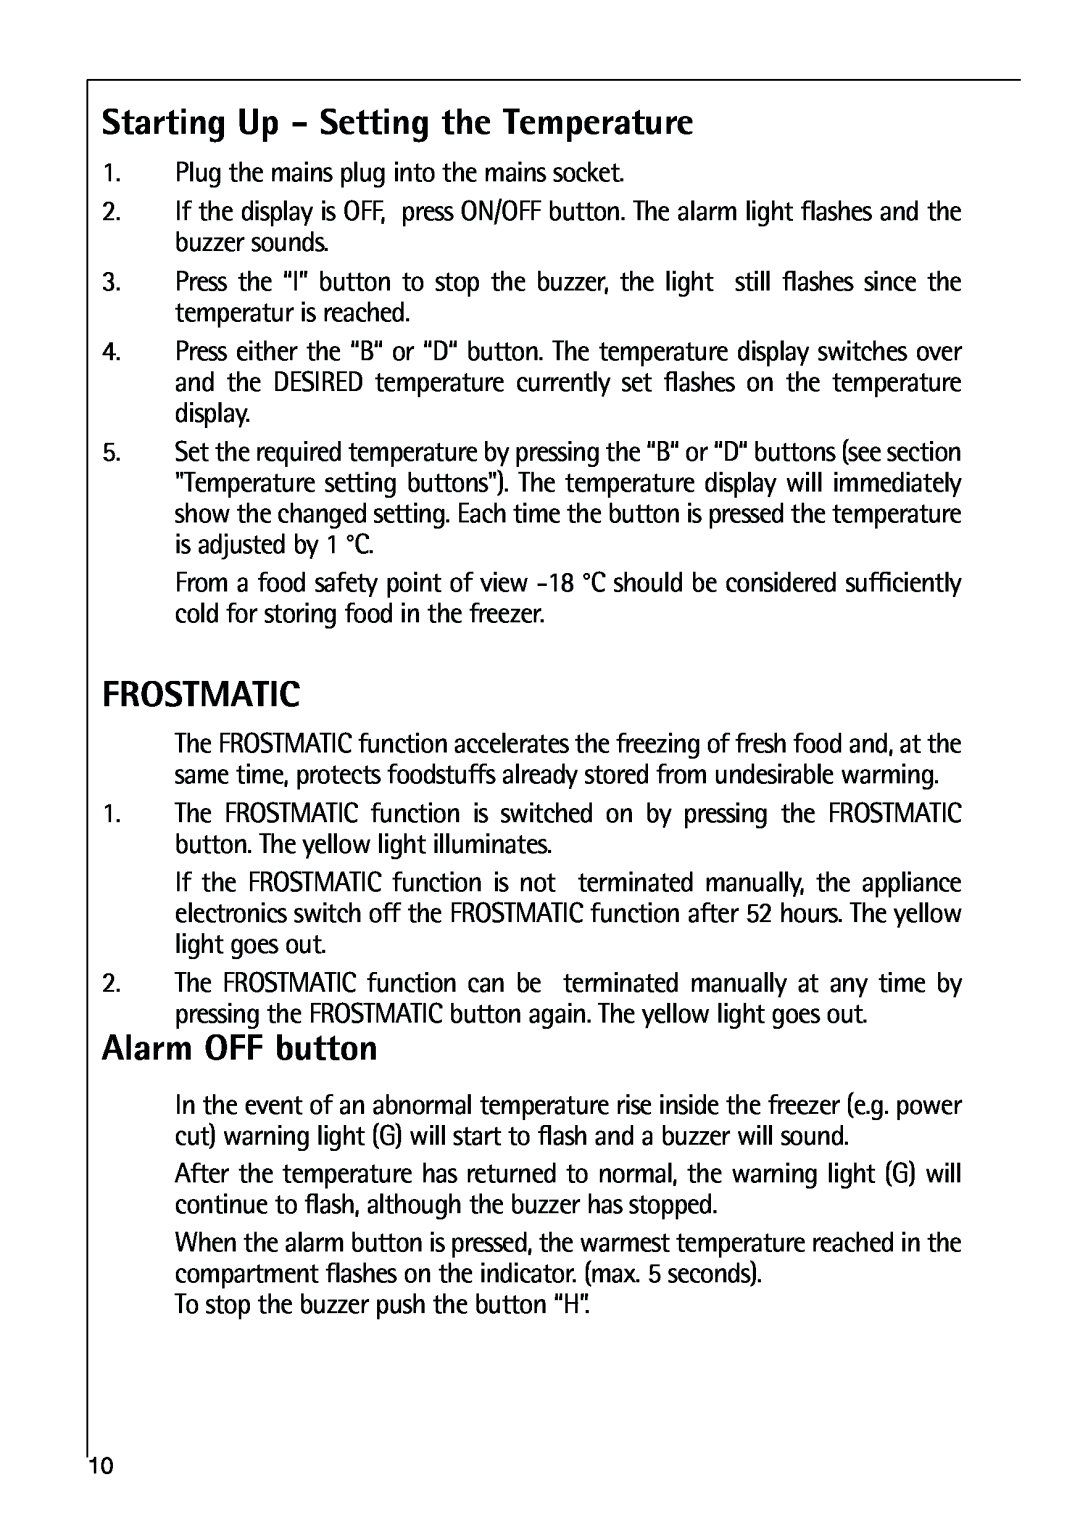 Electrolux 75270 GA user manual Starting Up - Setting the Temperature, Frostmatic, Alarm OFF button 